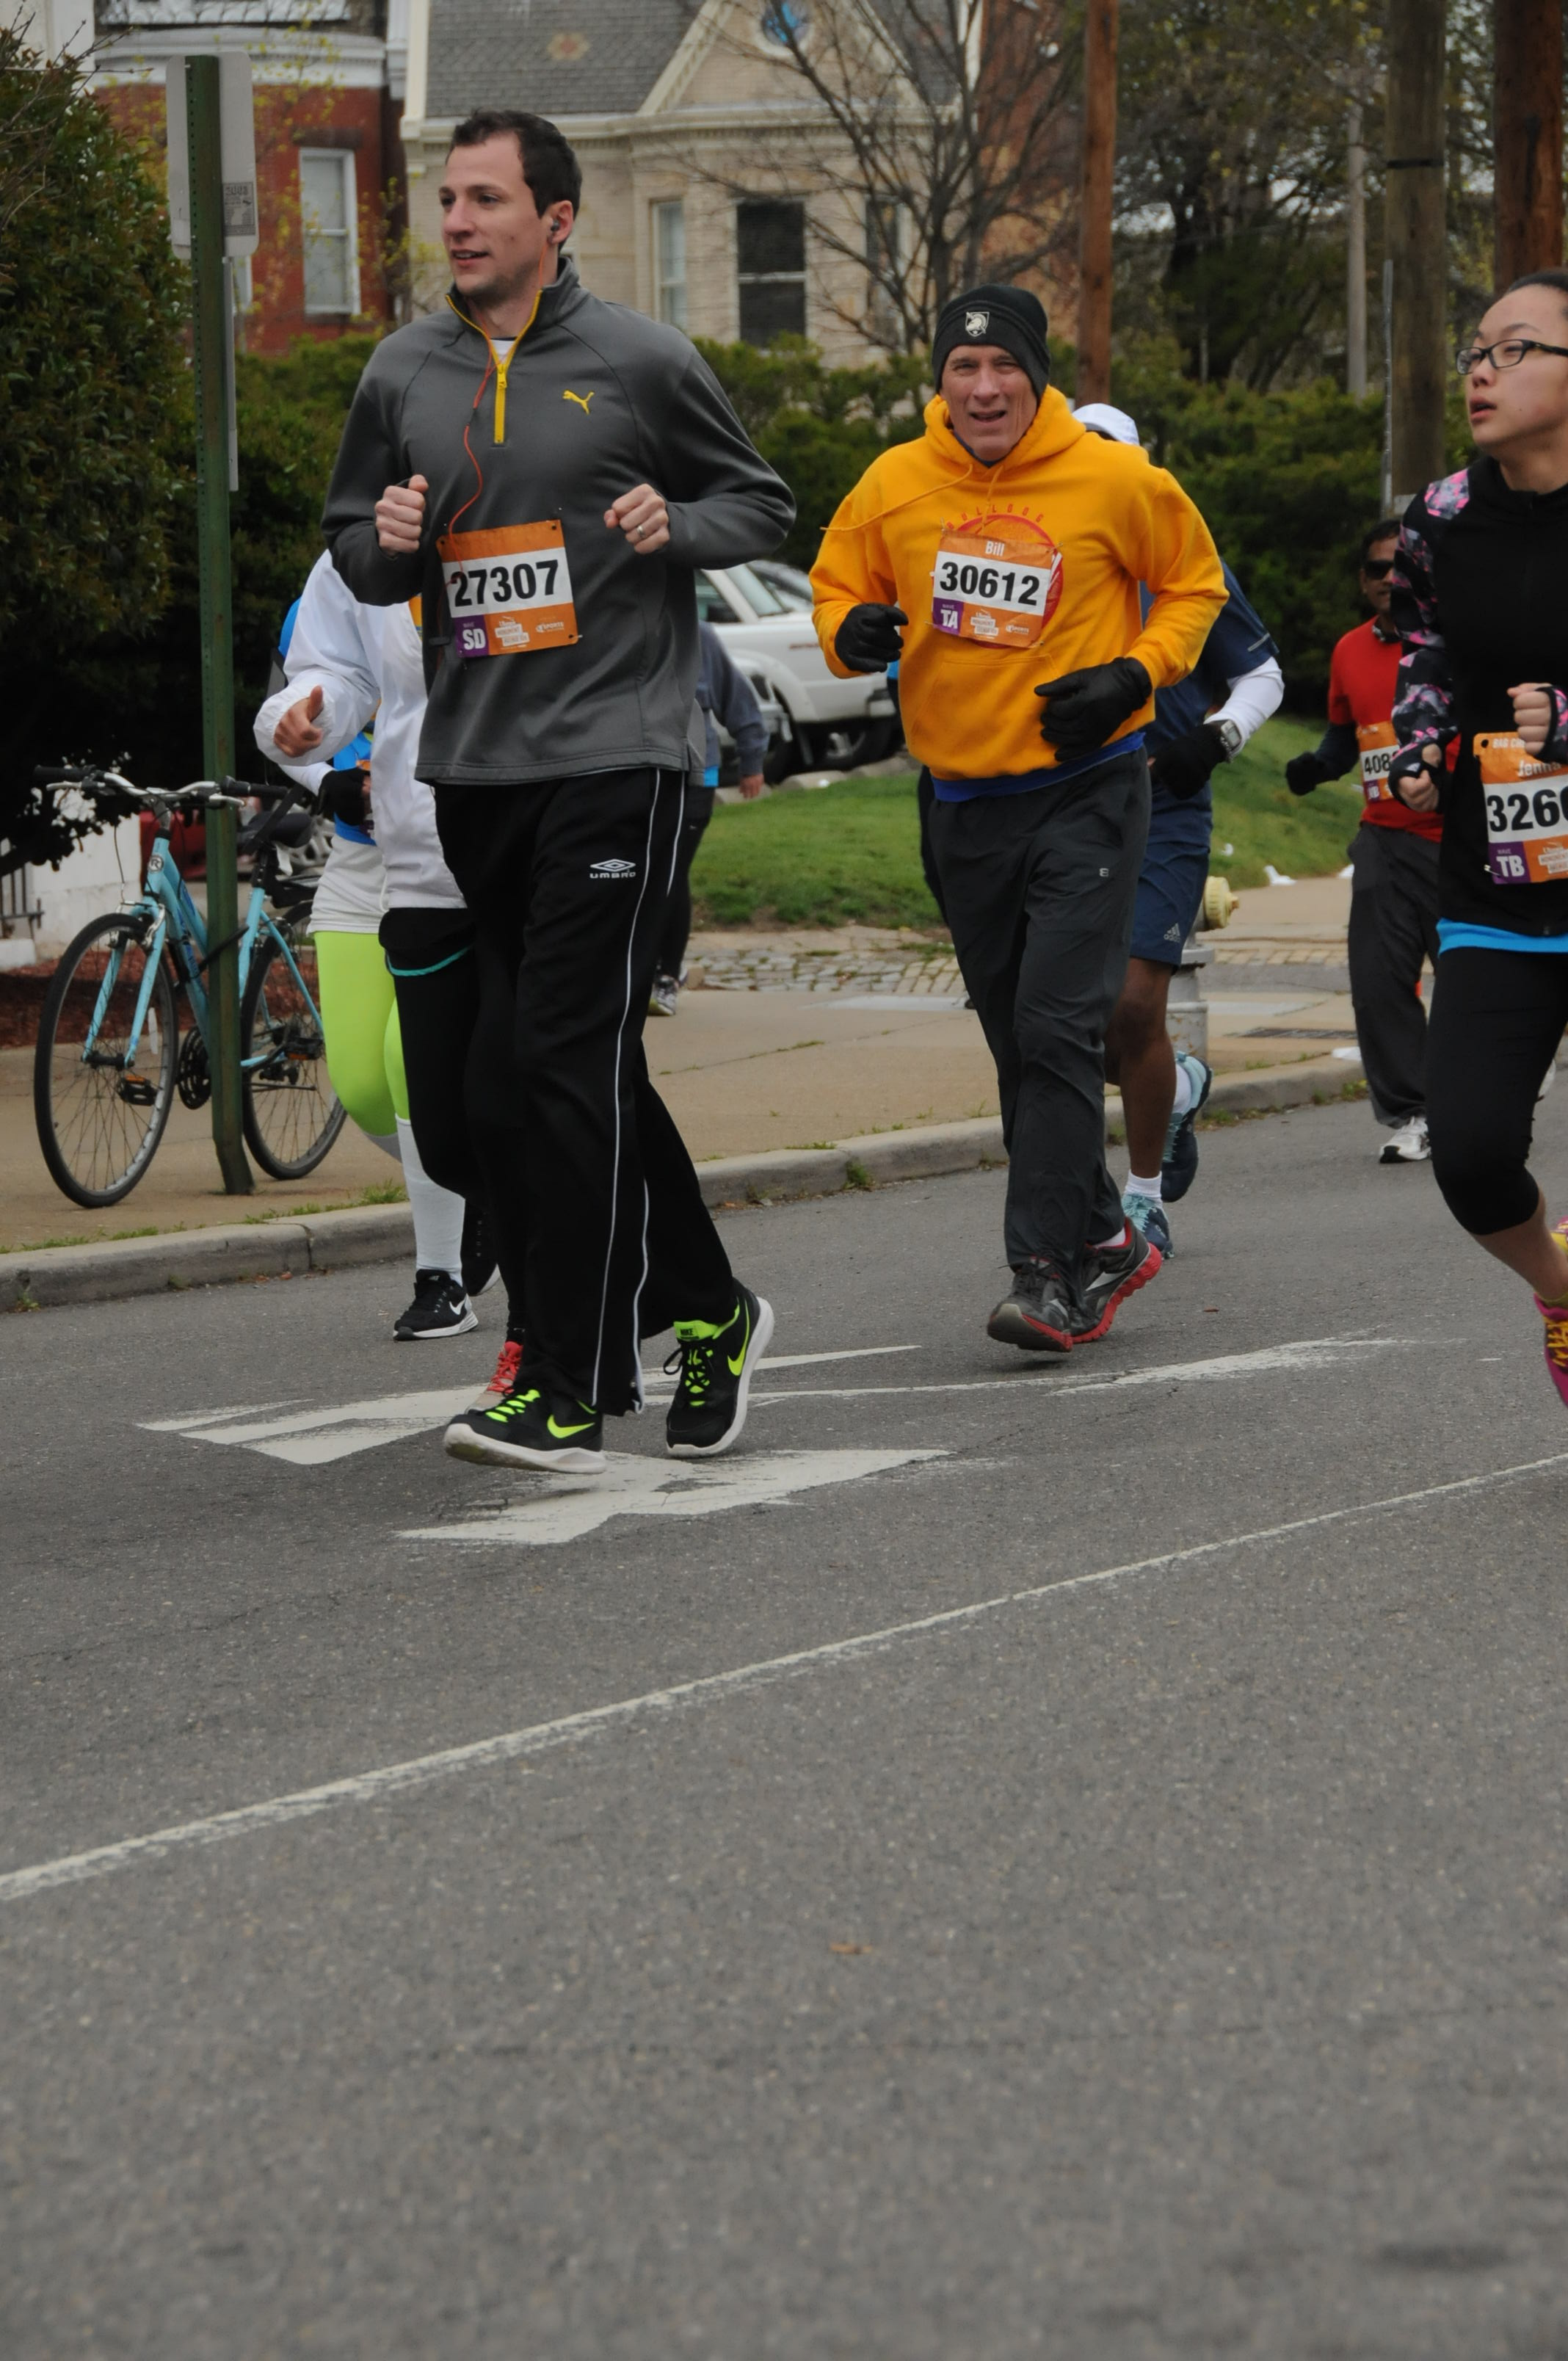 Bill Hughes (in orange) on April 9, 2016 at the Ukrop's Monument Avenue 10k.